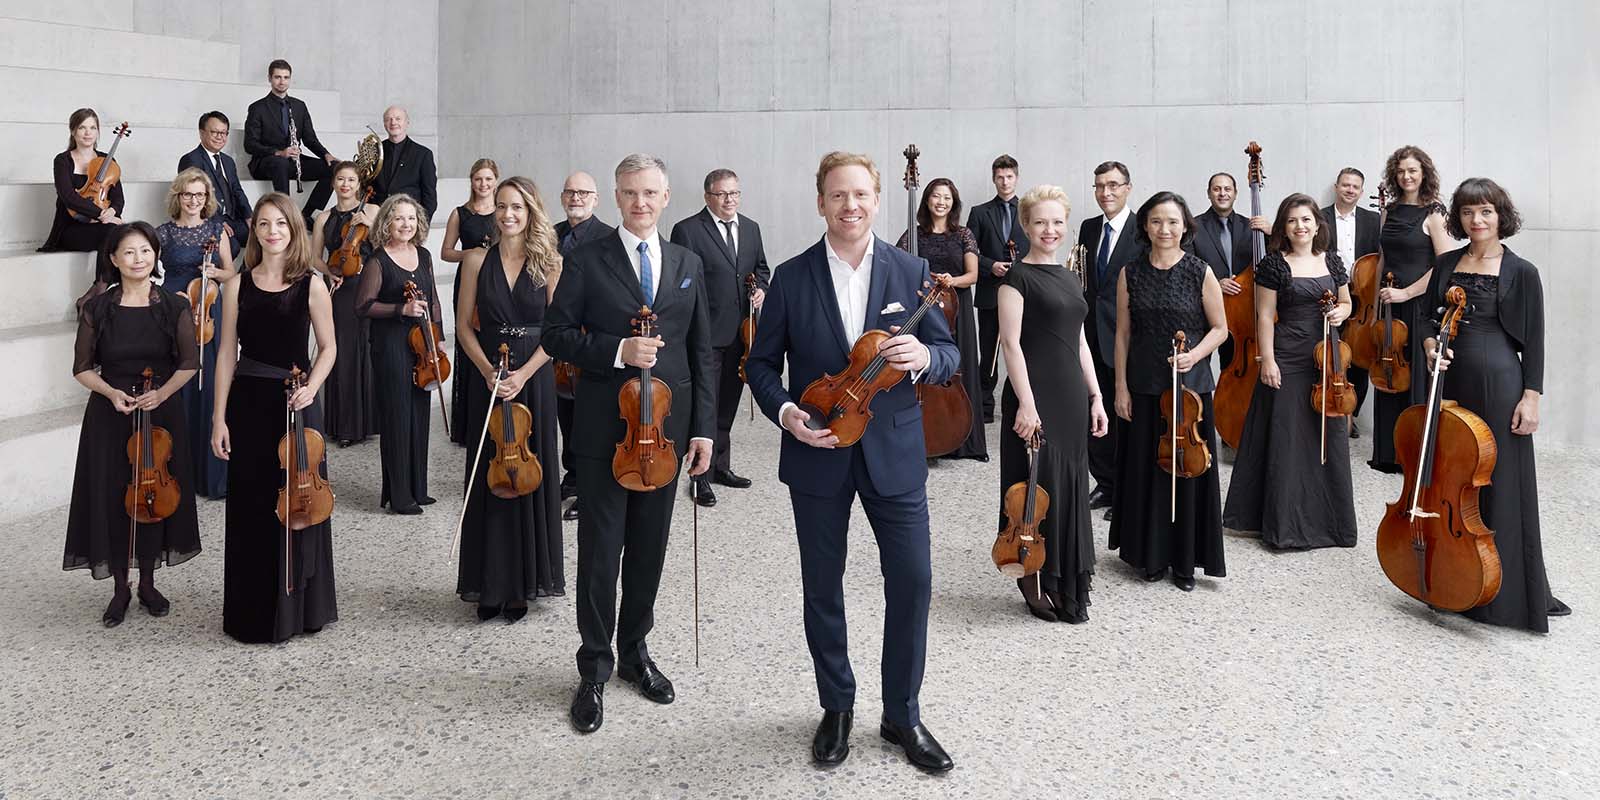 Daniel Hope and Zurich Chamber Orchestra posing with their instruments.